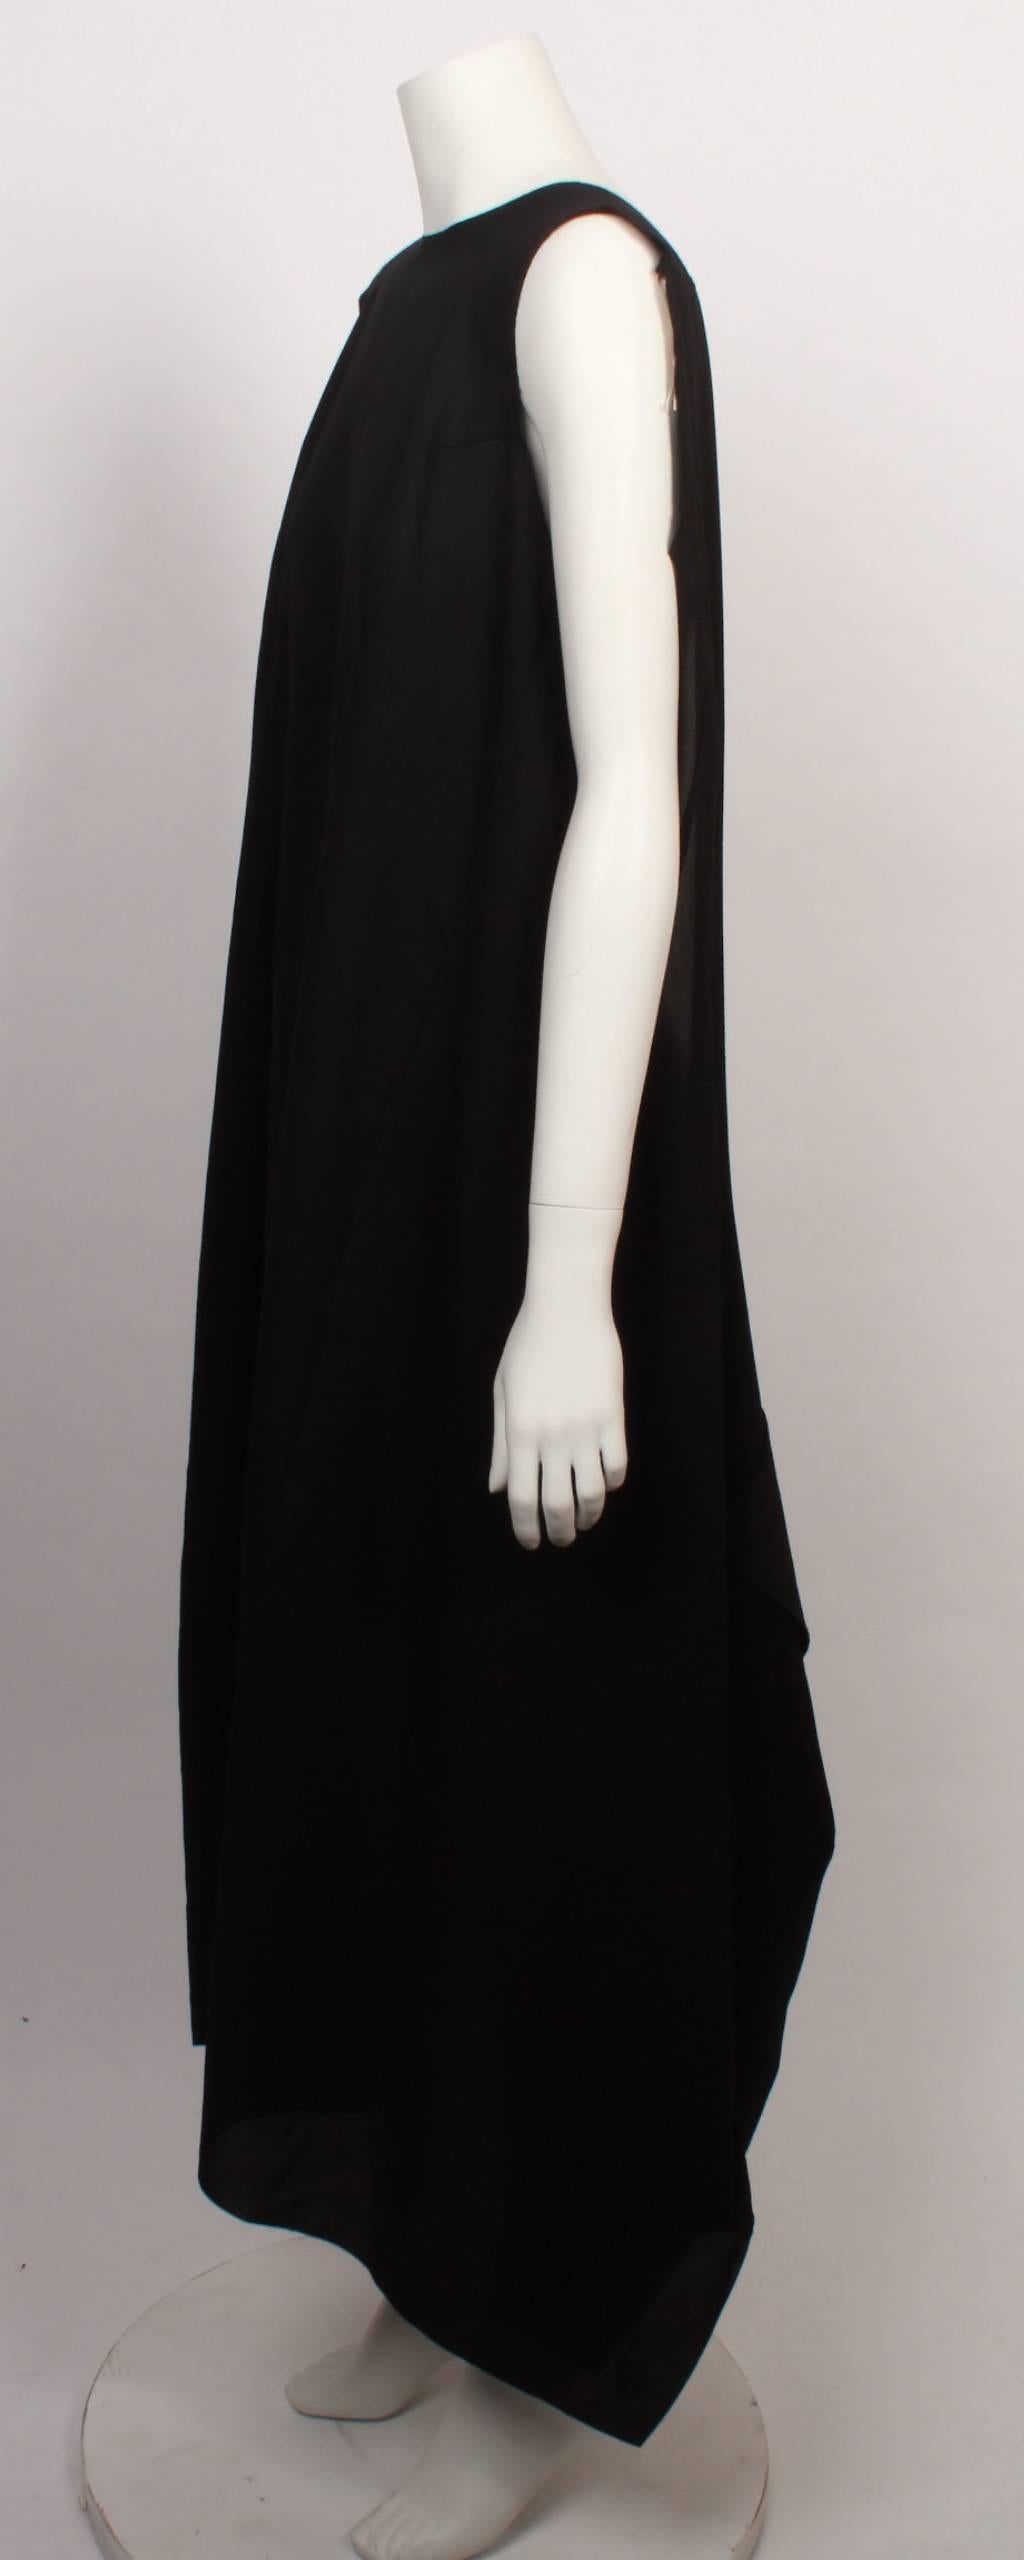 Comme des Garcons  black layer dress with long scooped out section that can be converted and reversed to be worn a myriad of ways. 
Fabric is a textured georgette and the dress is sleeveless and has raw edges. 


